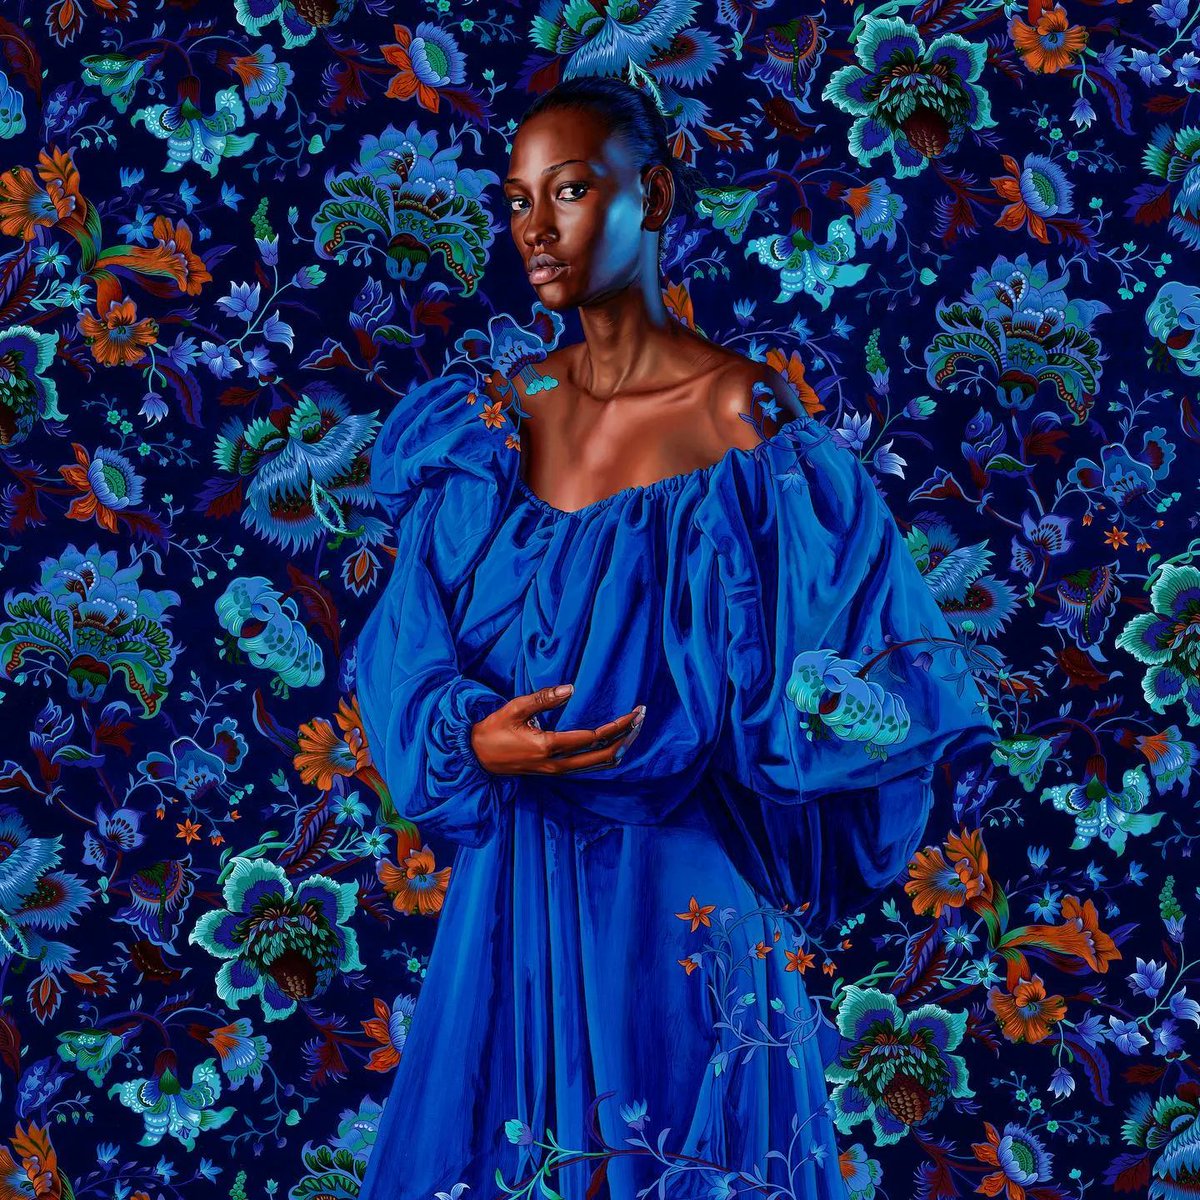 How stunning is this: 'Portrait of Aissatou Dialo Gueye II' by @kehindewileyart ❤

'Portrait of Aissatou Dialo Gueye II' (2021)
Oil on linen, 96 x 64 inches 

#beautifulbizarre #kehindewiley #portraitpainting #oilpainting #figurativeart #blackartist #colourfulart #fineart